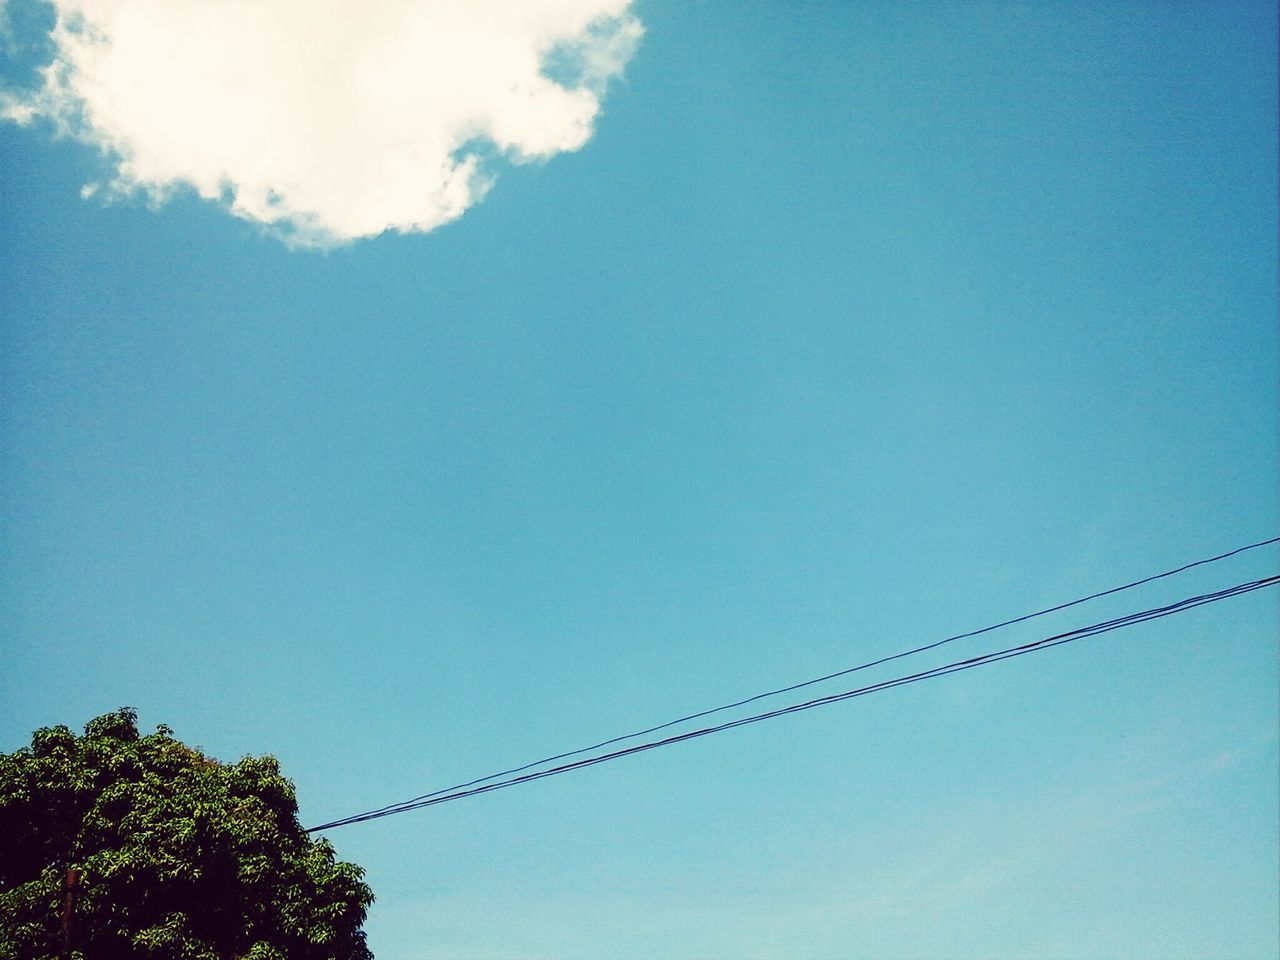 low angle view, blue, power line, clear sky, cable, sky, copy space, connection, electricity pylon, electricity, power supply, high section, nature, tree, power cable, outdoors, day, no people, technology, fuel and power generation